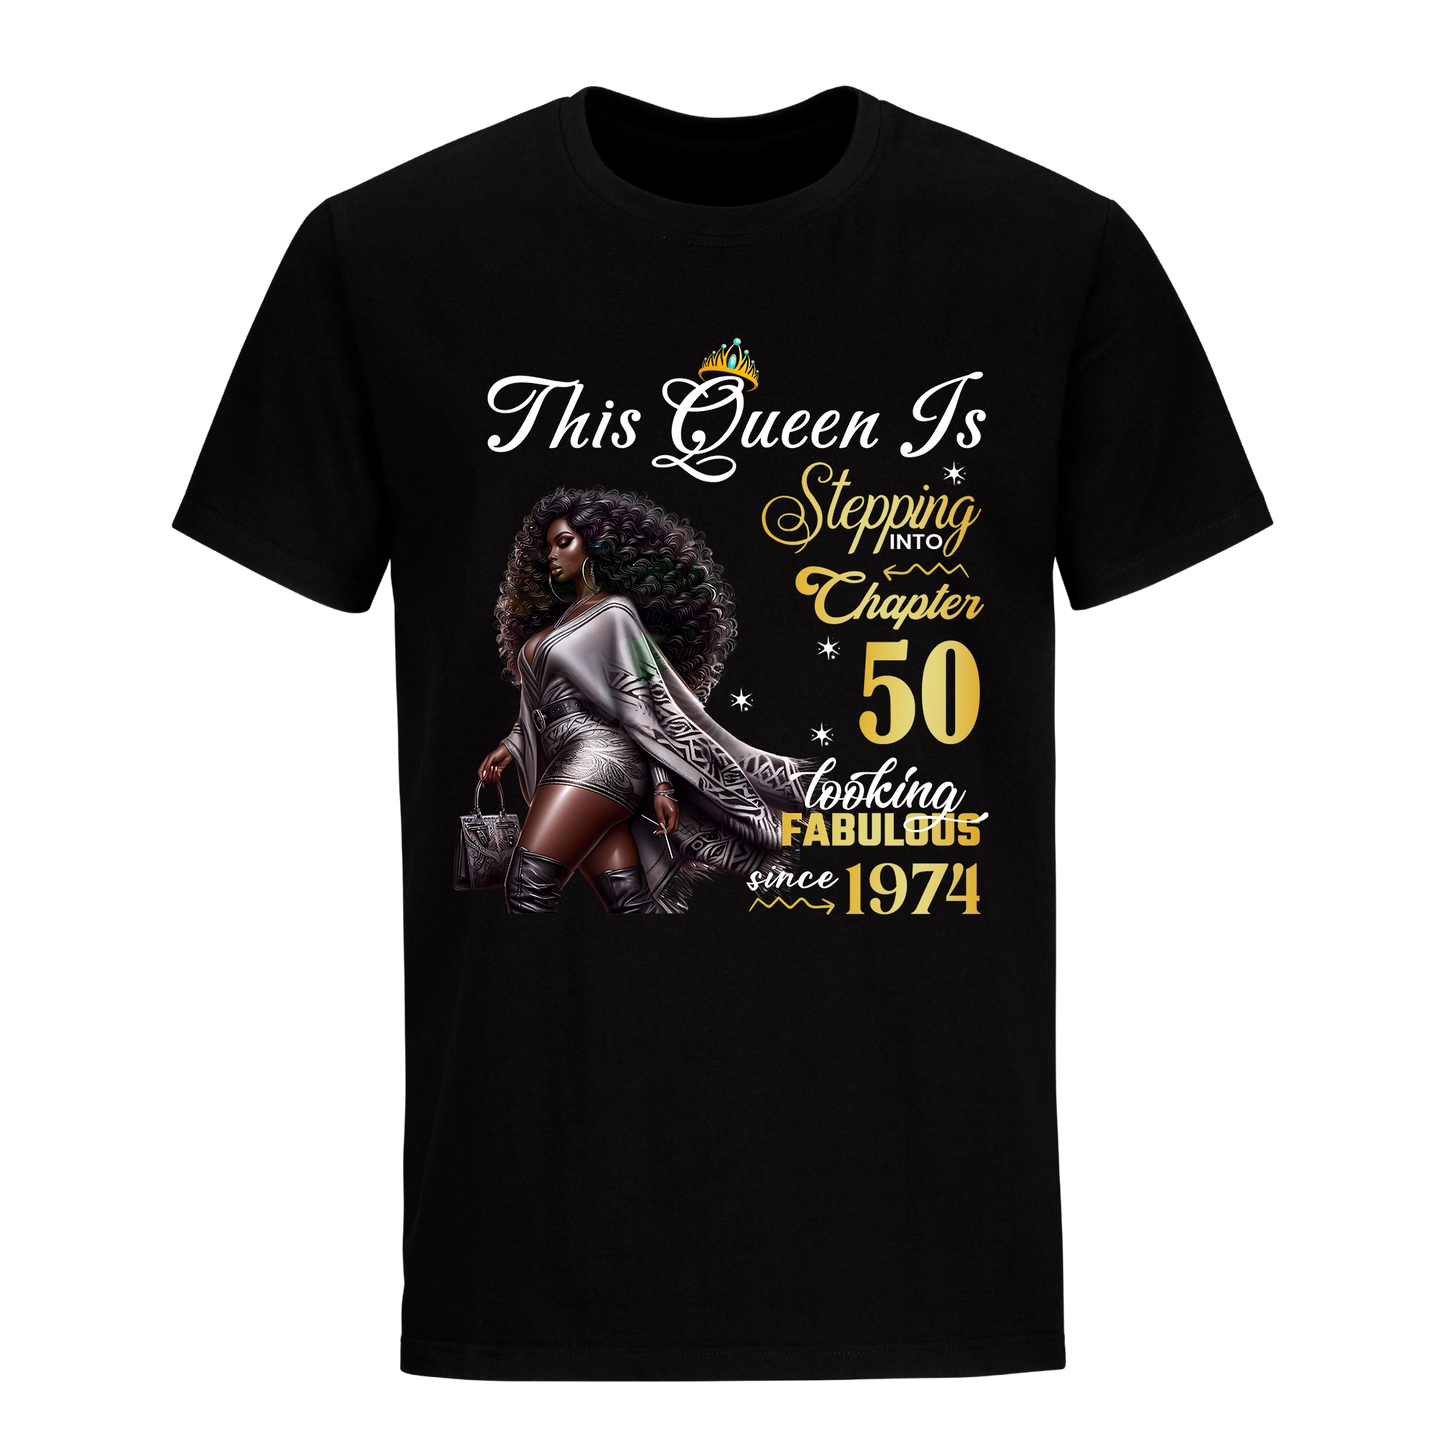 THIS QUEEN IS FABULOUS 50 UNISEX SHIRT